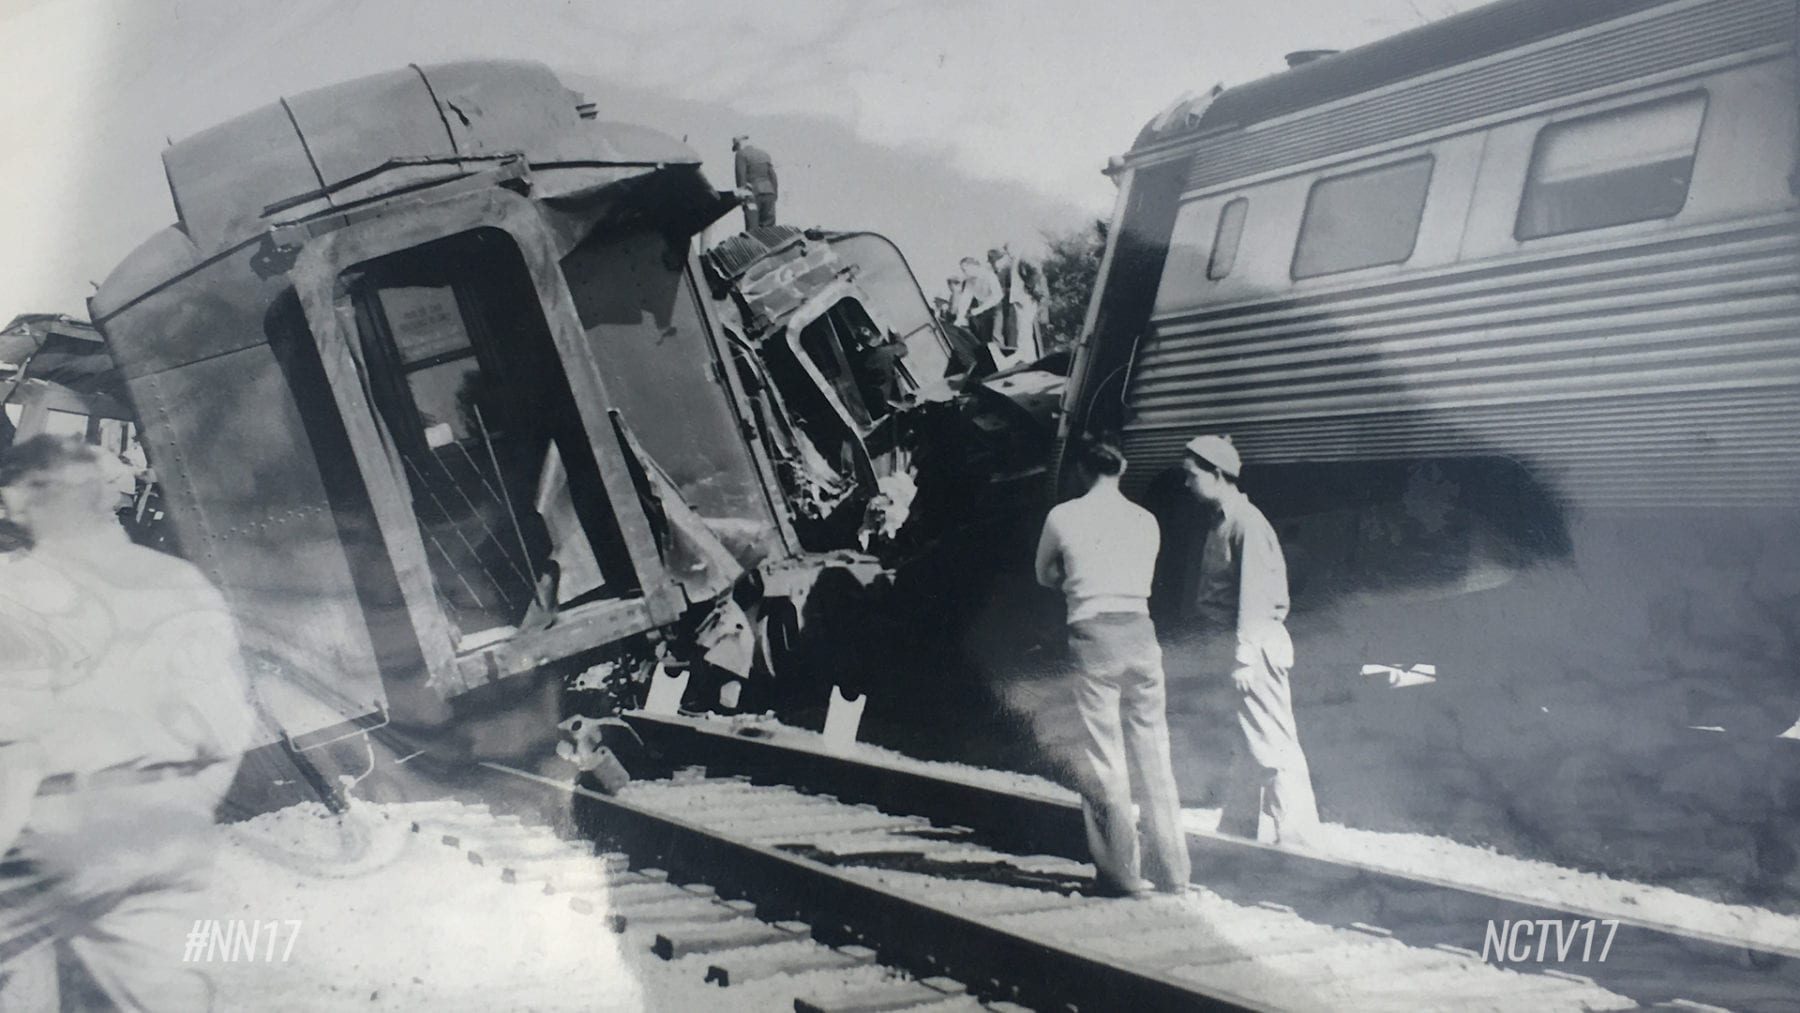 75 Years Later Remembering The 1946 Train Crash In Naperville 4551